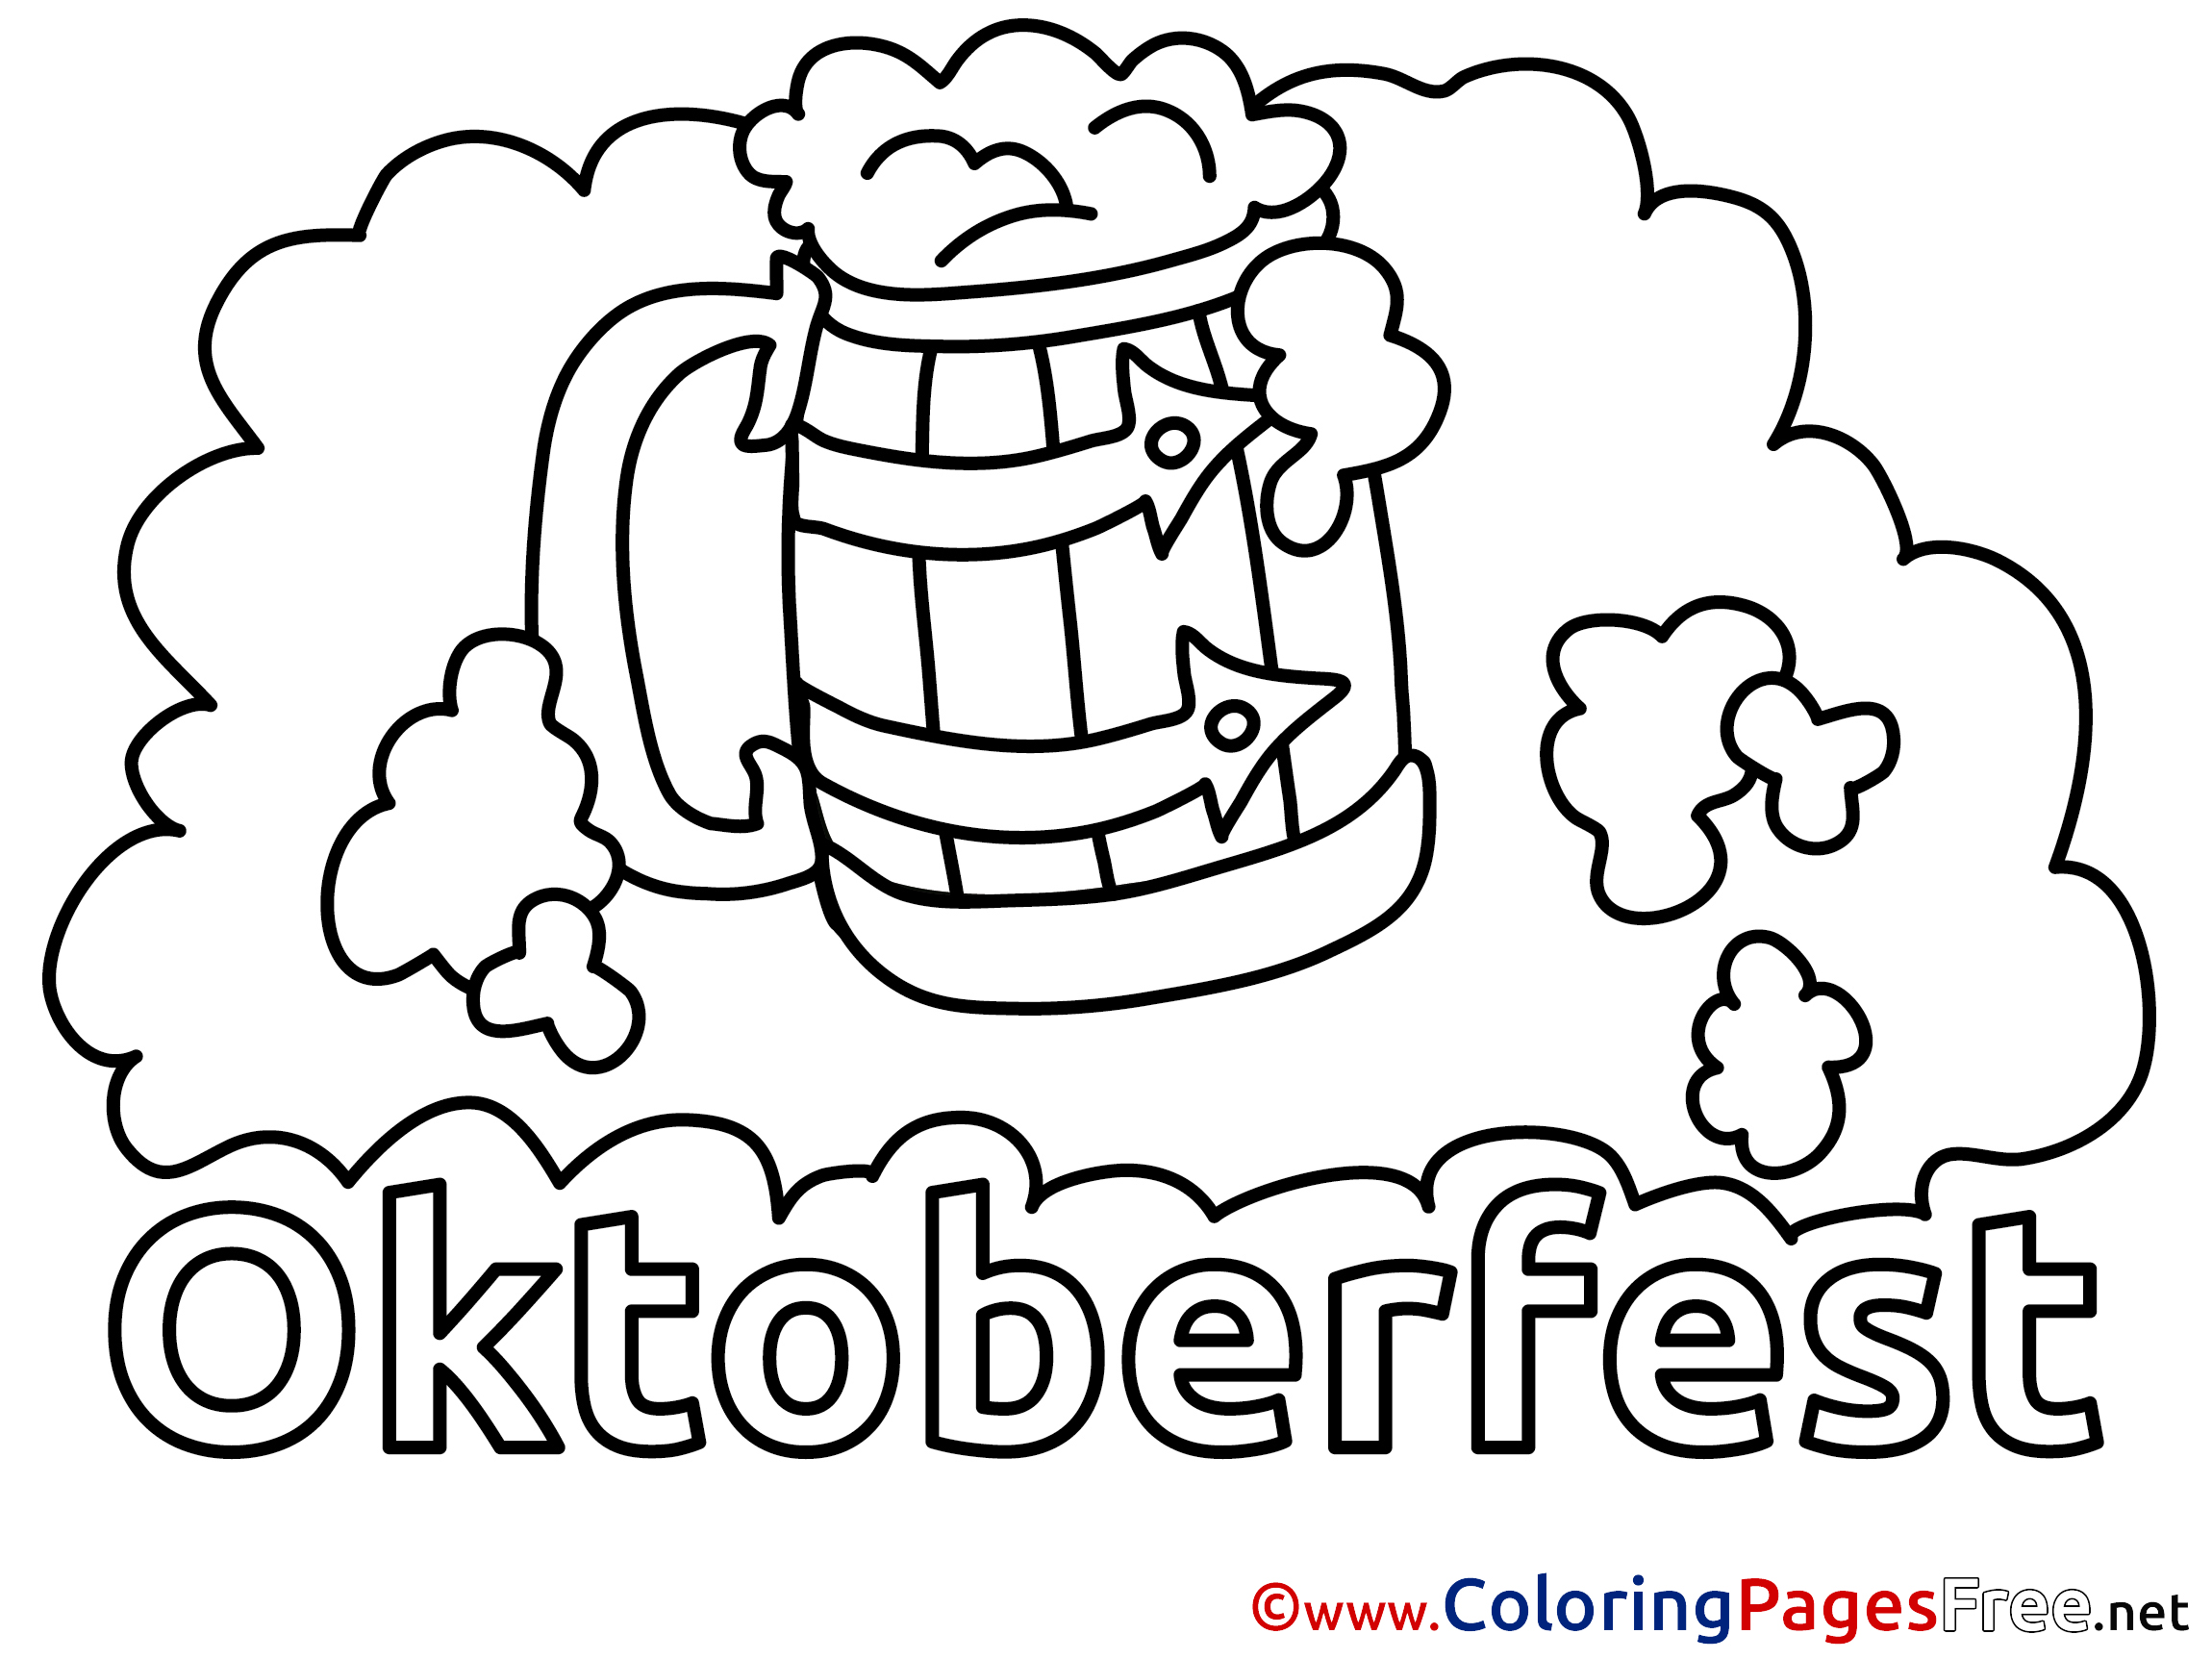 foam-oktoberfest-coloring-pages-for-free